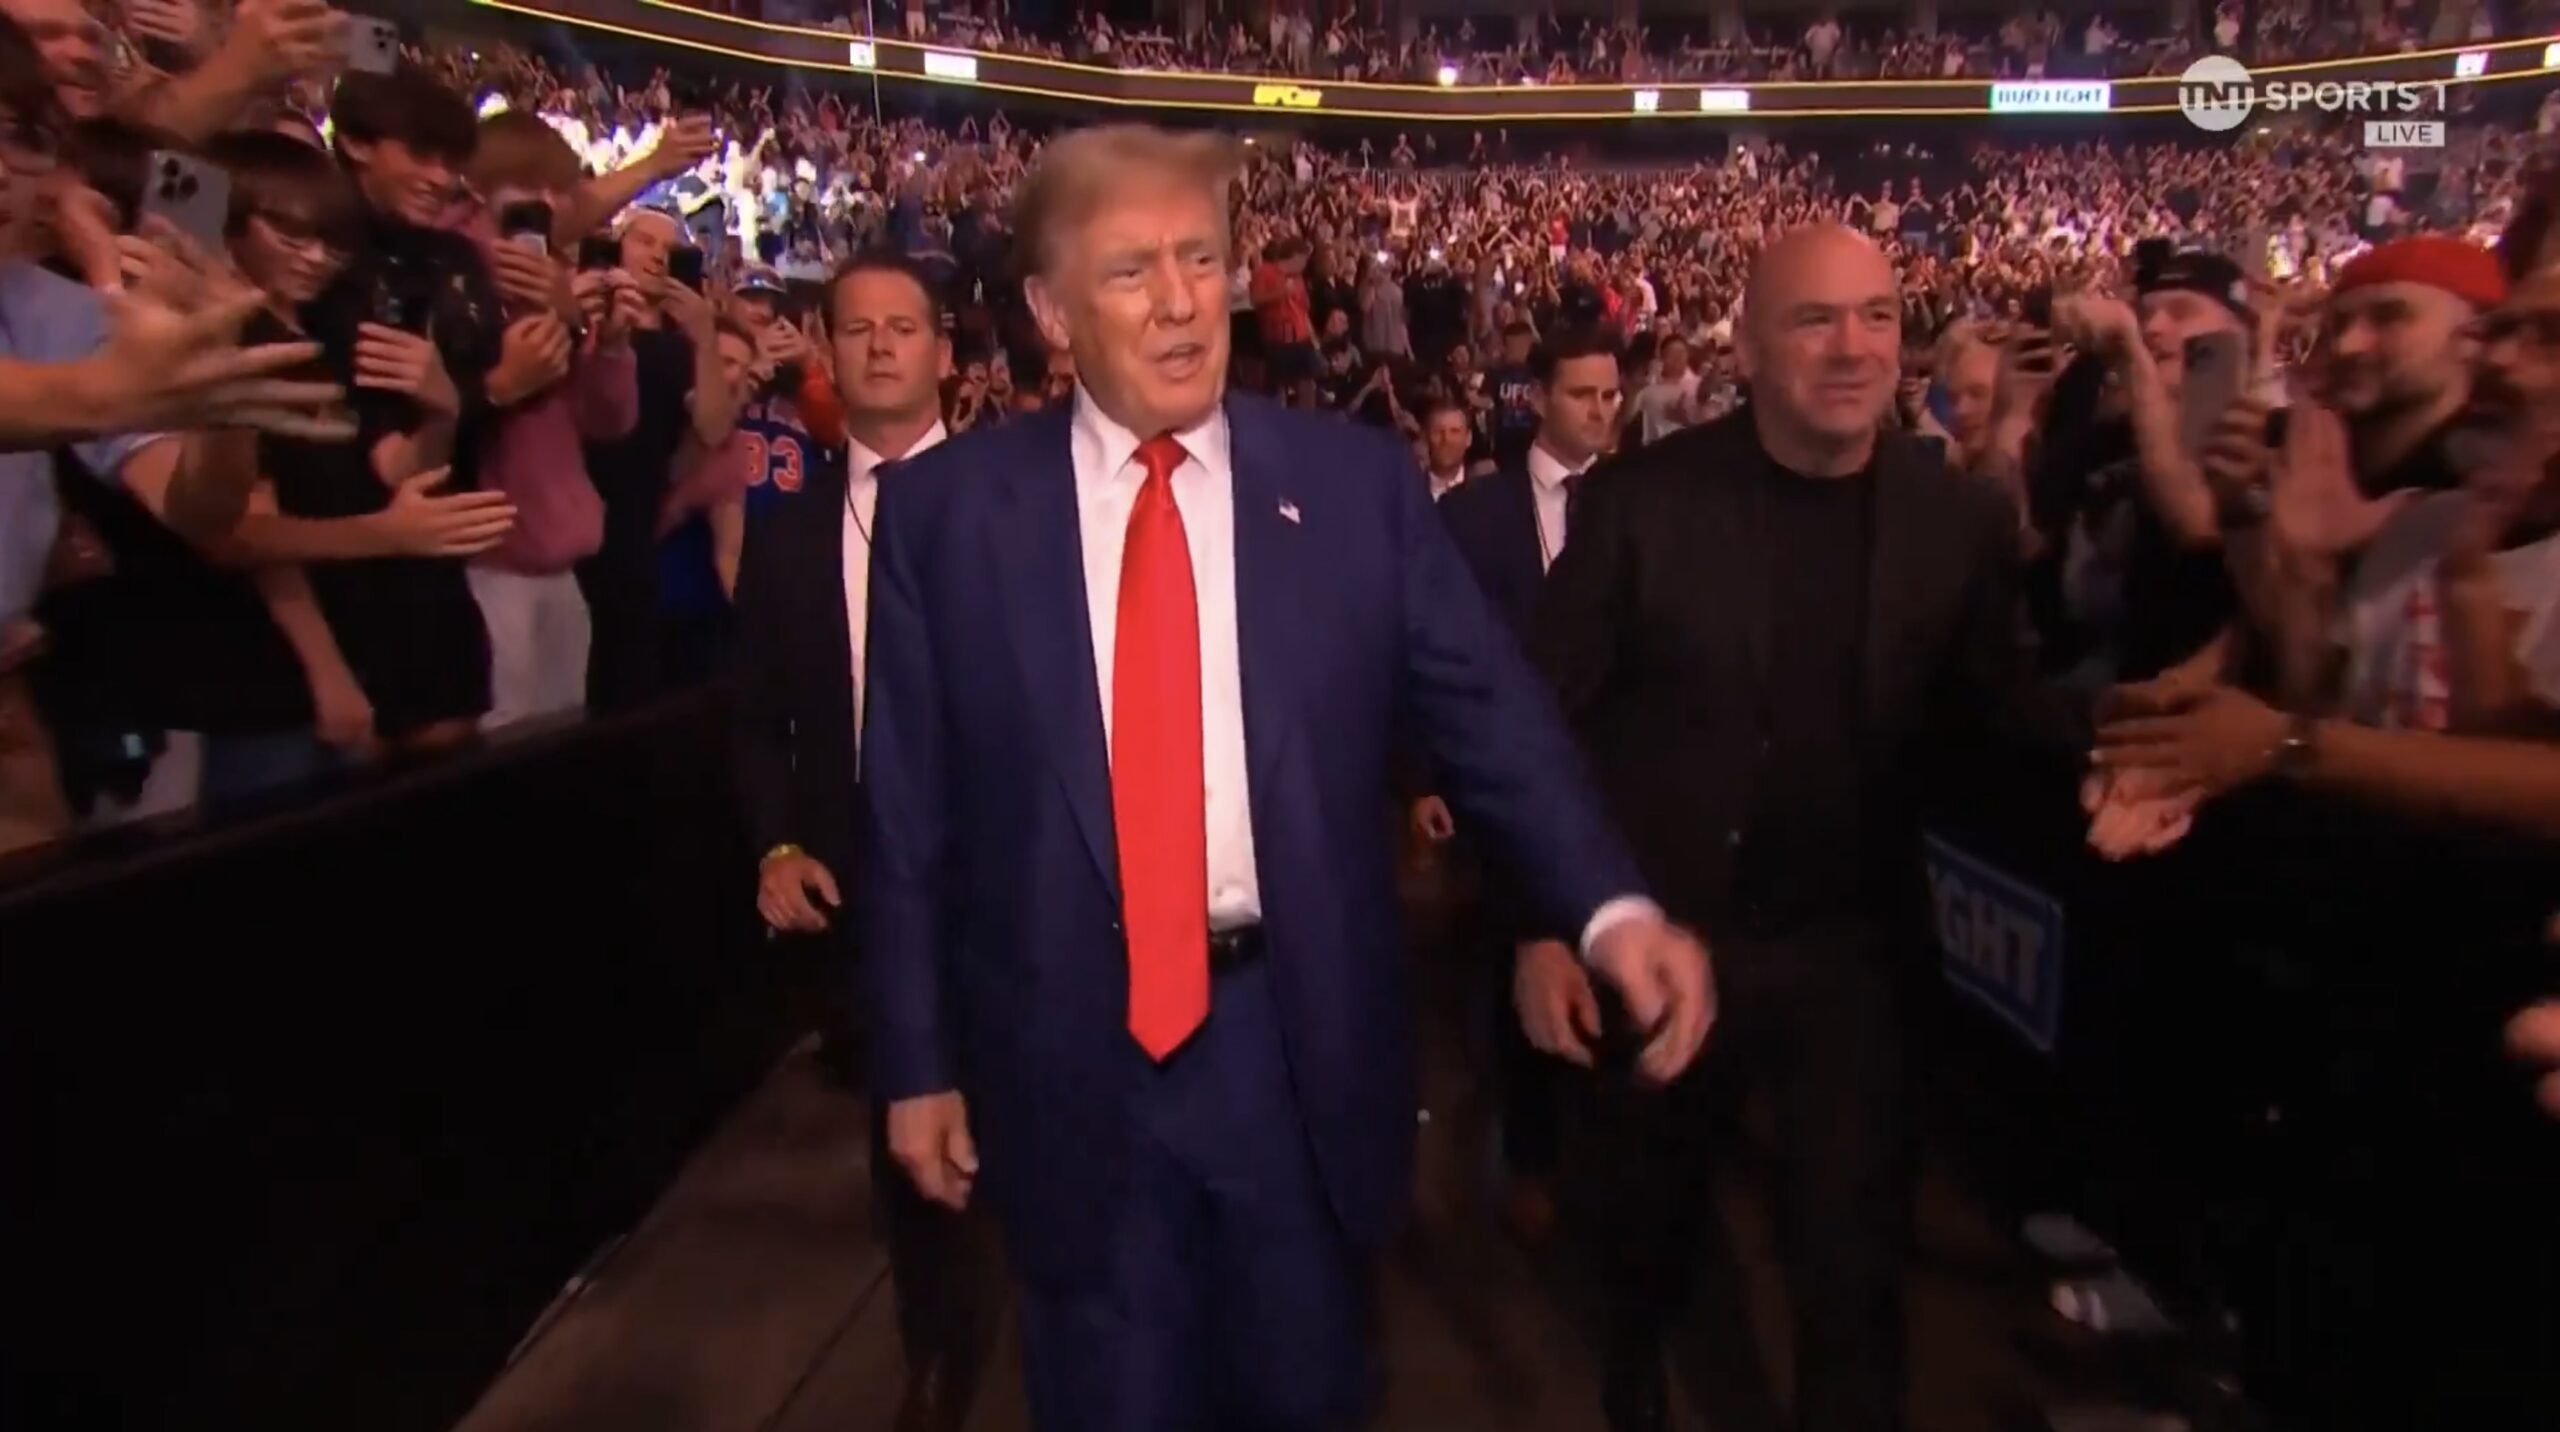 President Trump receives a hero's welcome at UFC 302, just days after being convicted in a Kangaroo court of a trumped-up crime (VIDEO) |  The Gateway expert